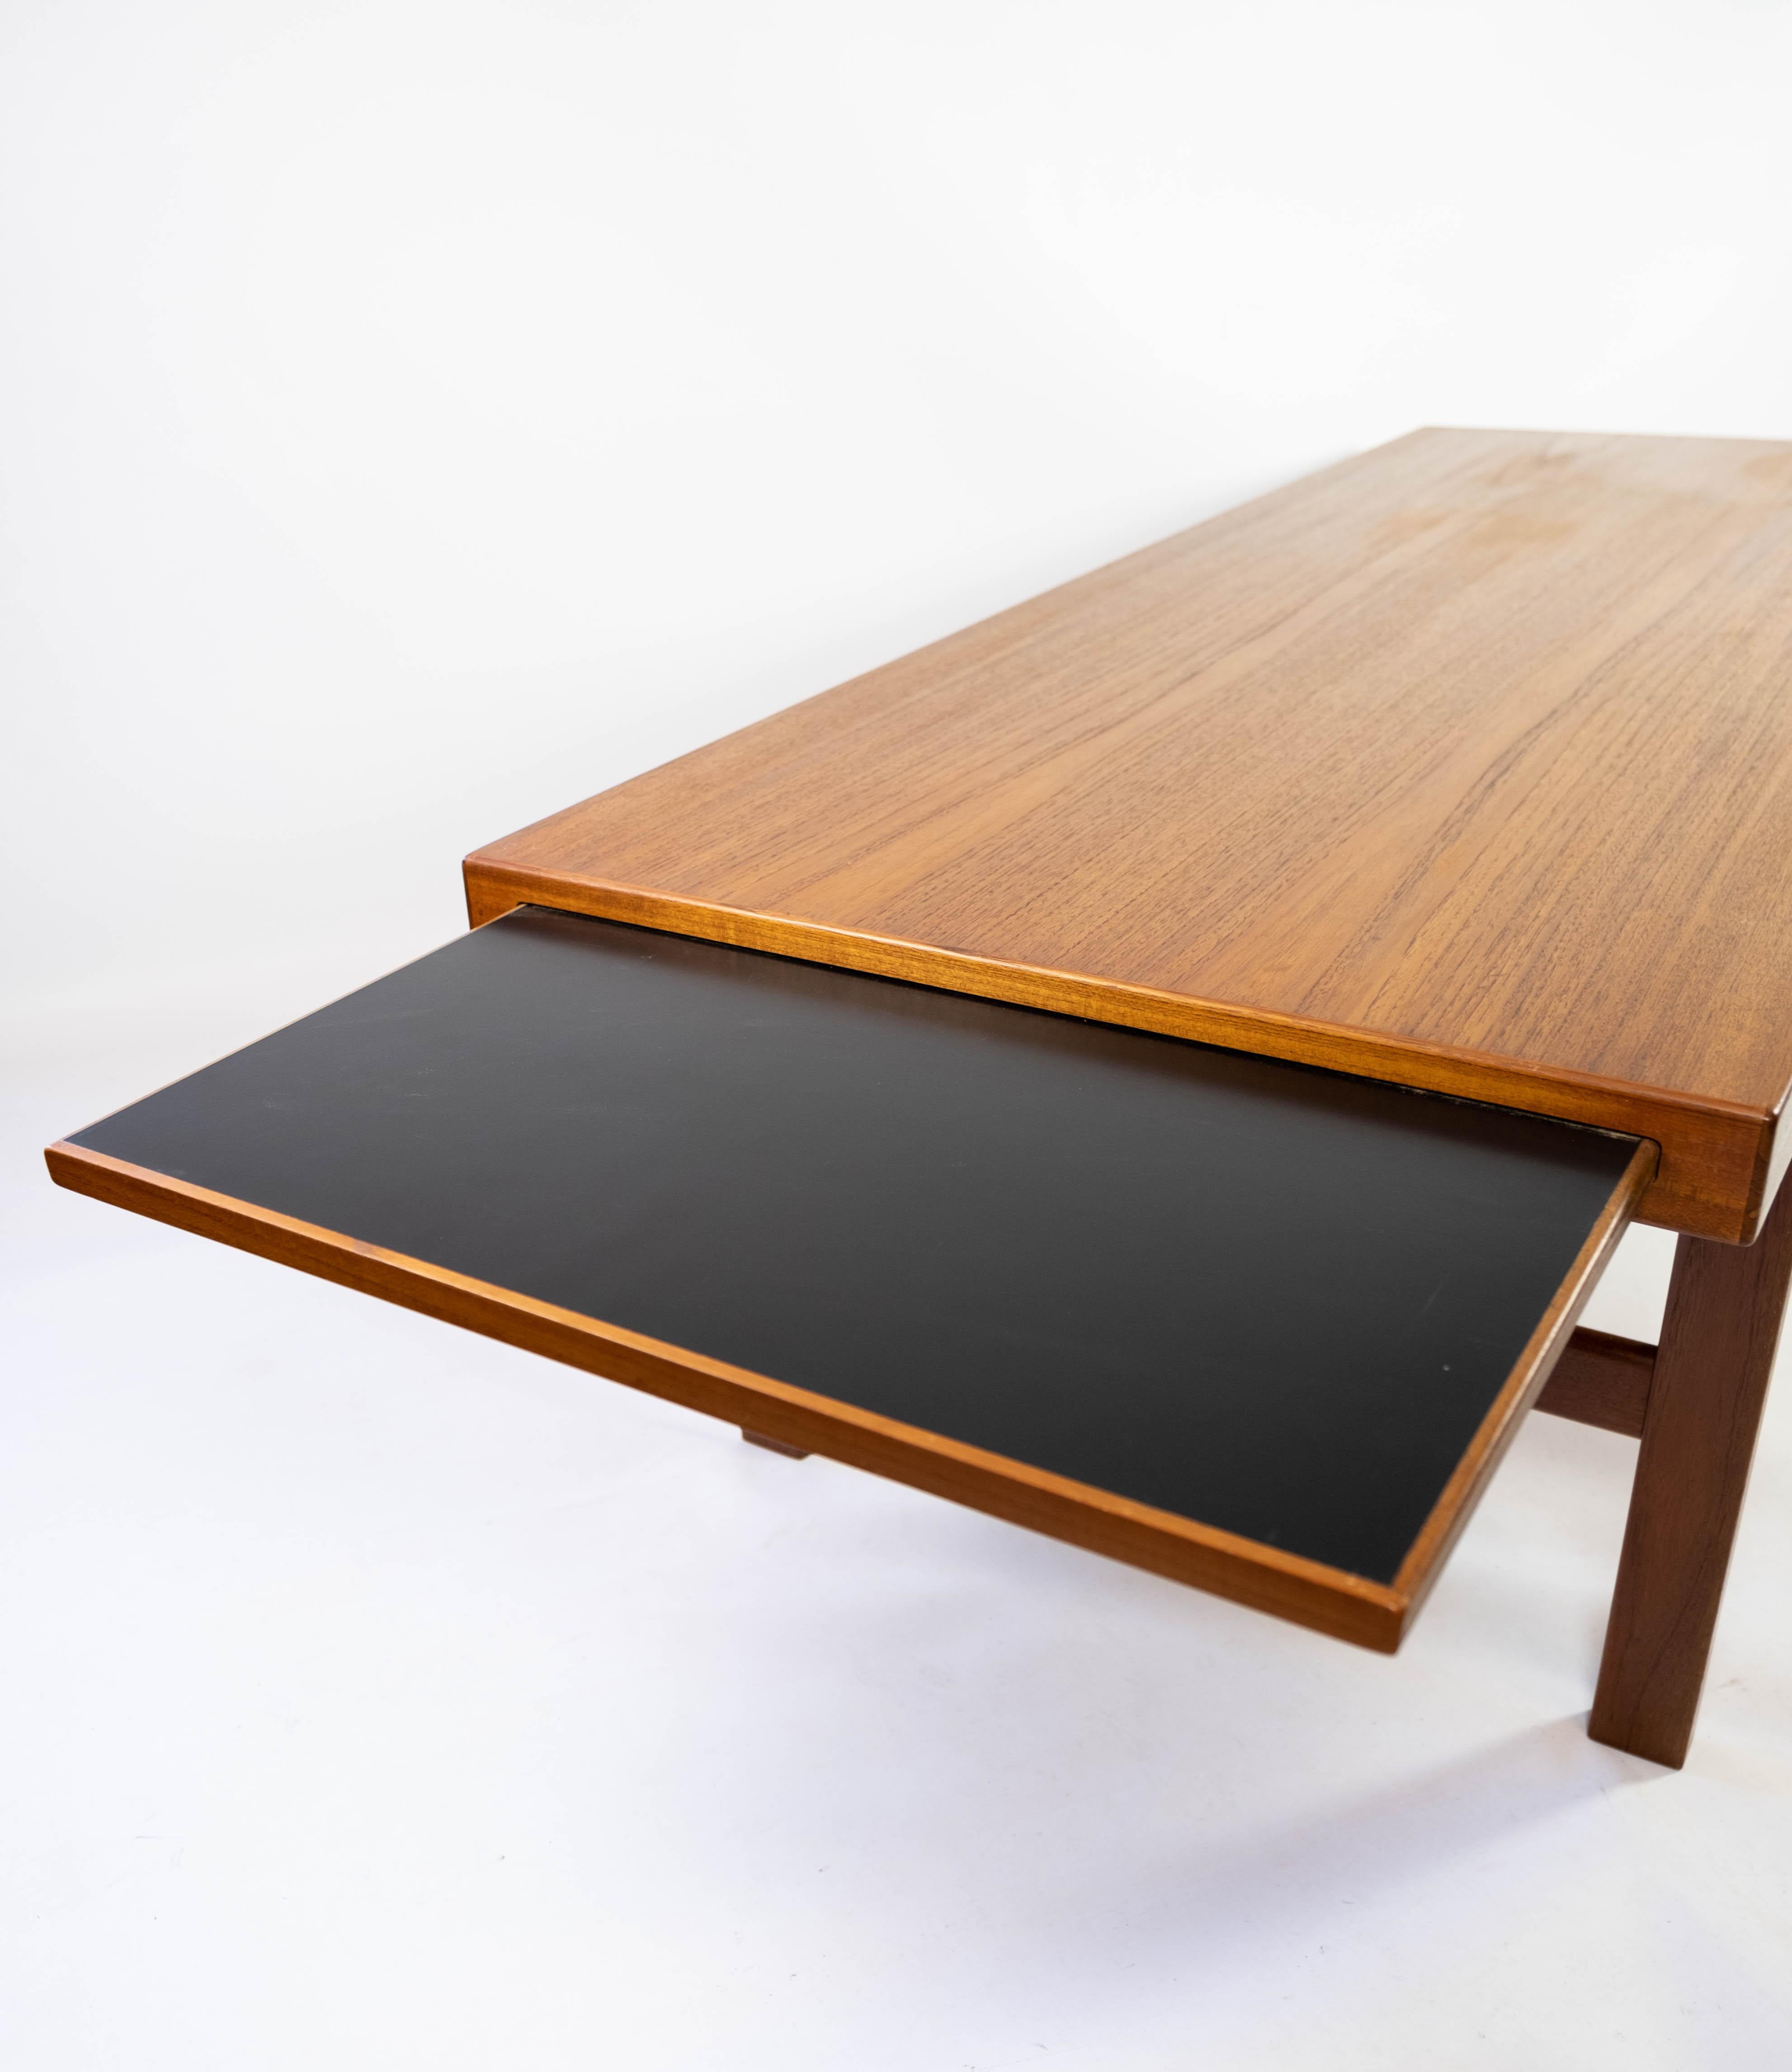 Coffee Table Made In Teak With Extension Plate, Danish Design From 1960s For Sale 2